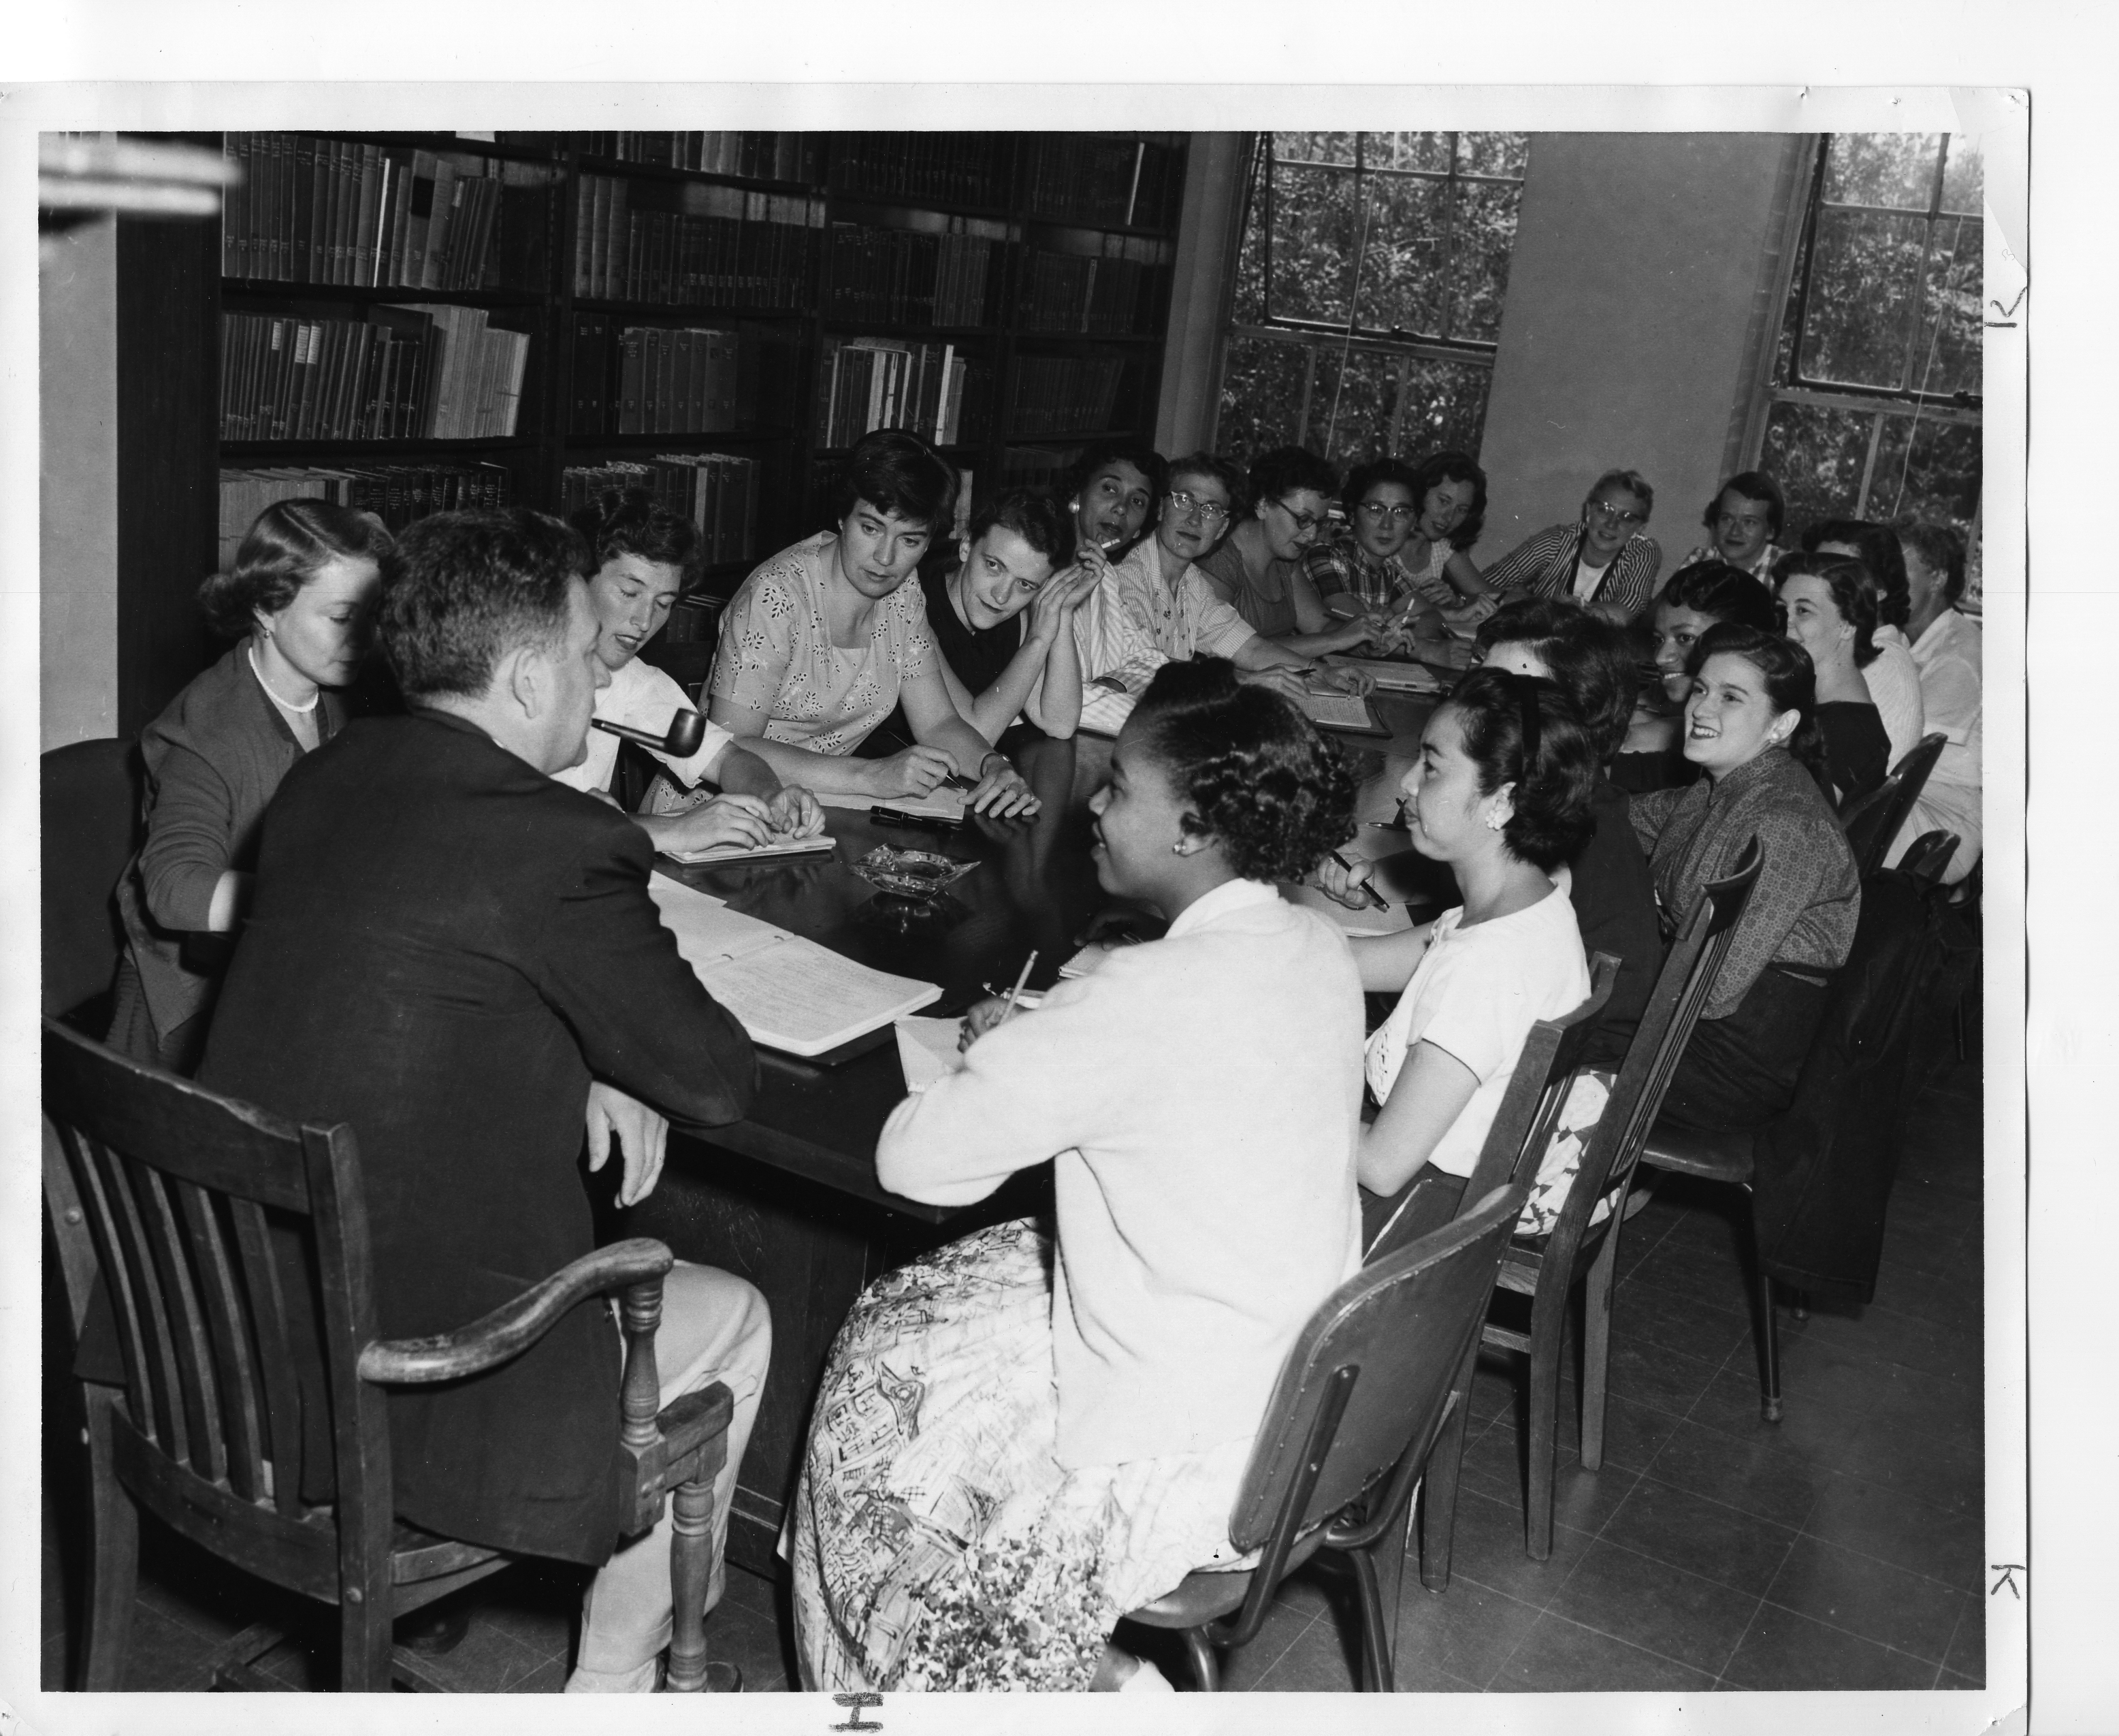 Black and white photo of a group of people seated at a table.